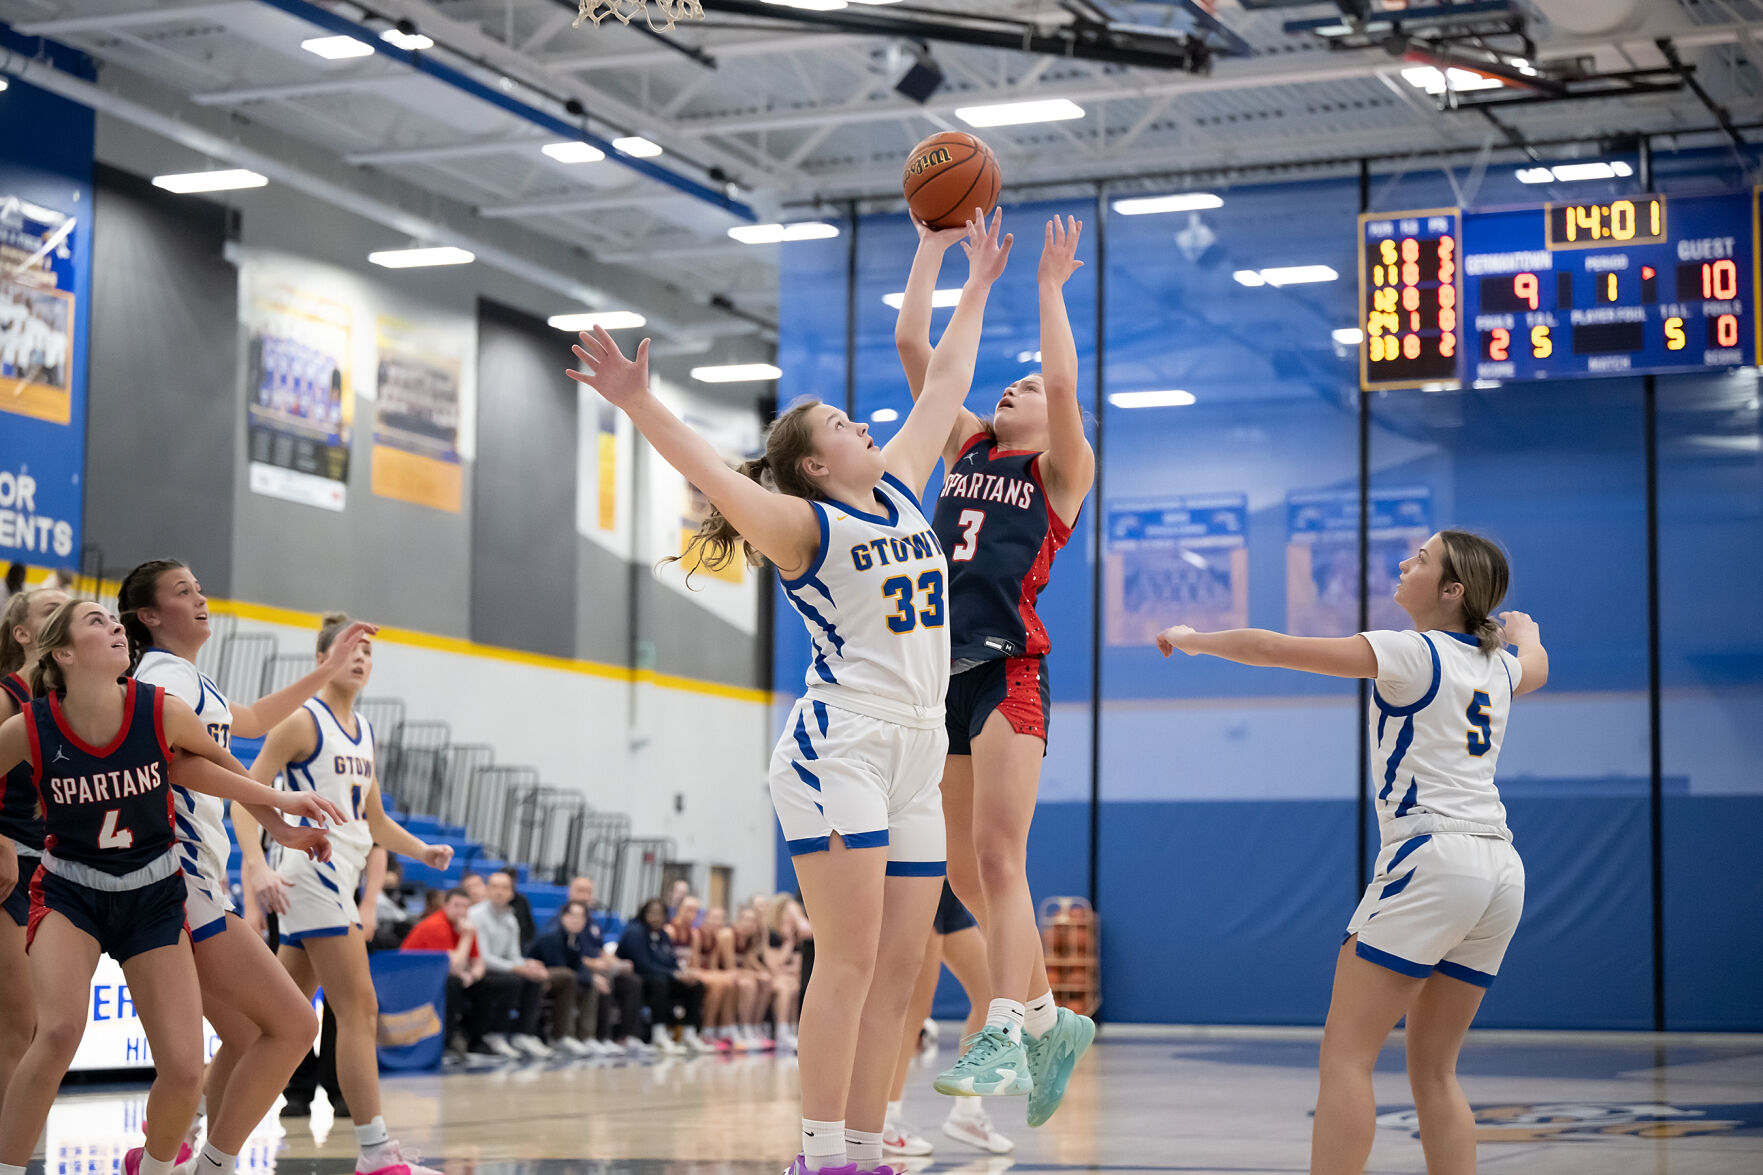 Germantown Girls Basketball Team Shines with Key Victory Over Brookfield East, Led by KK Arnold